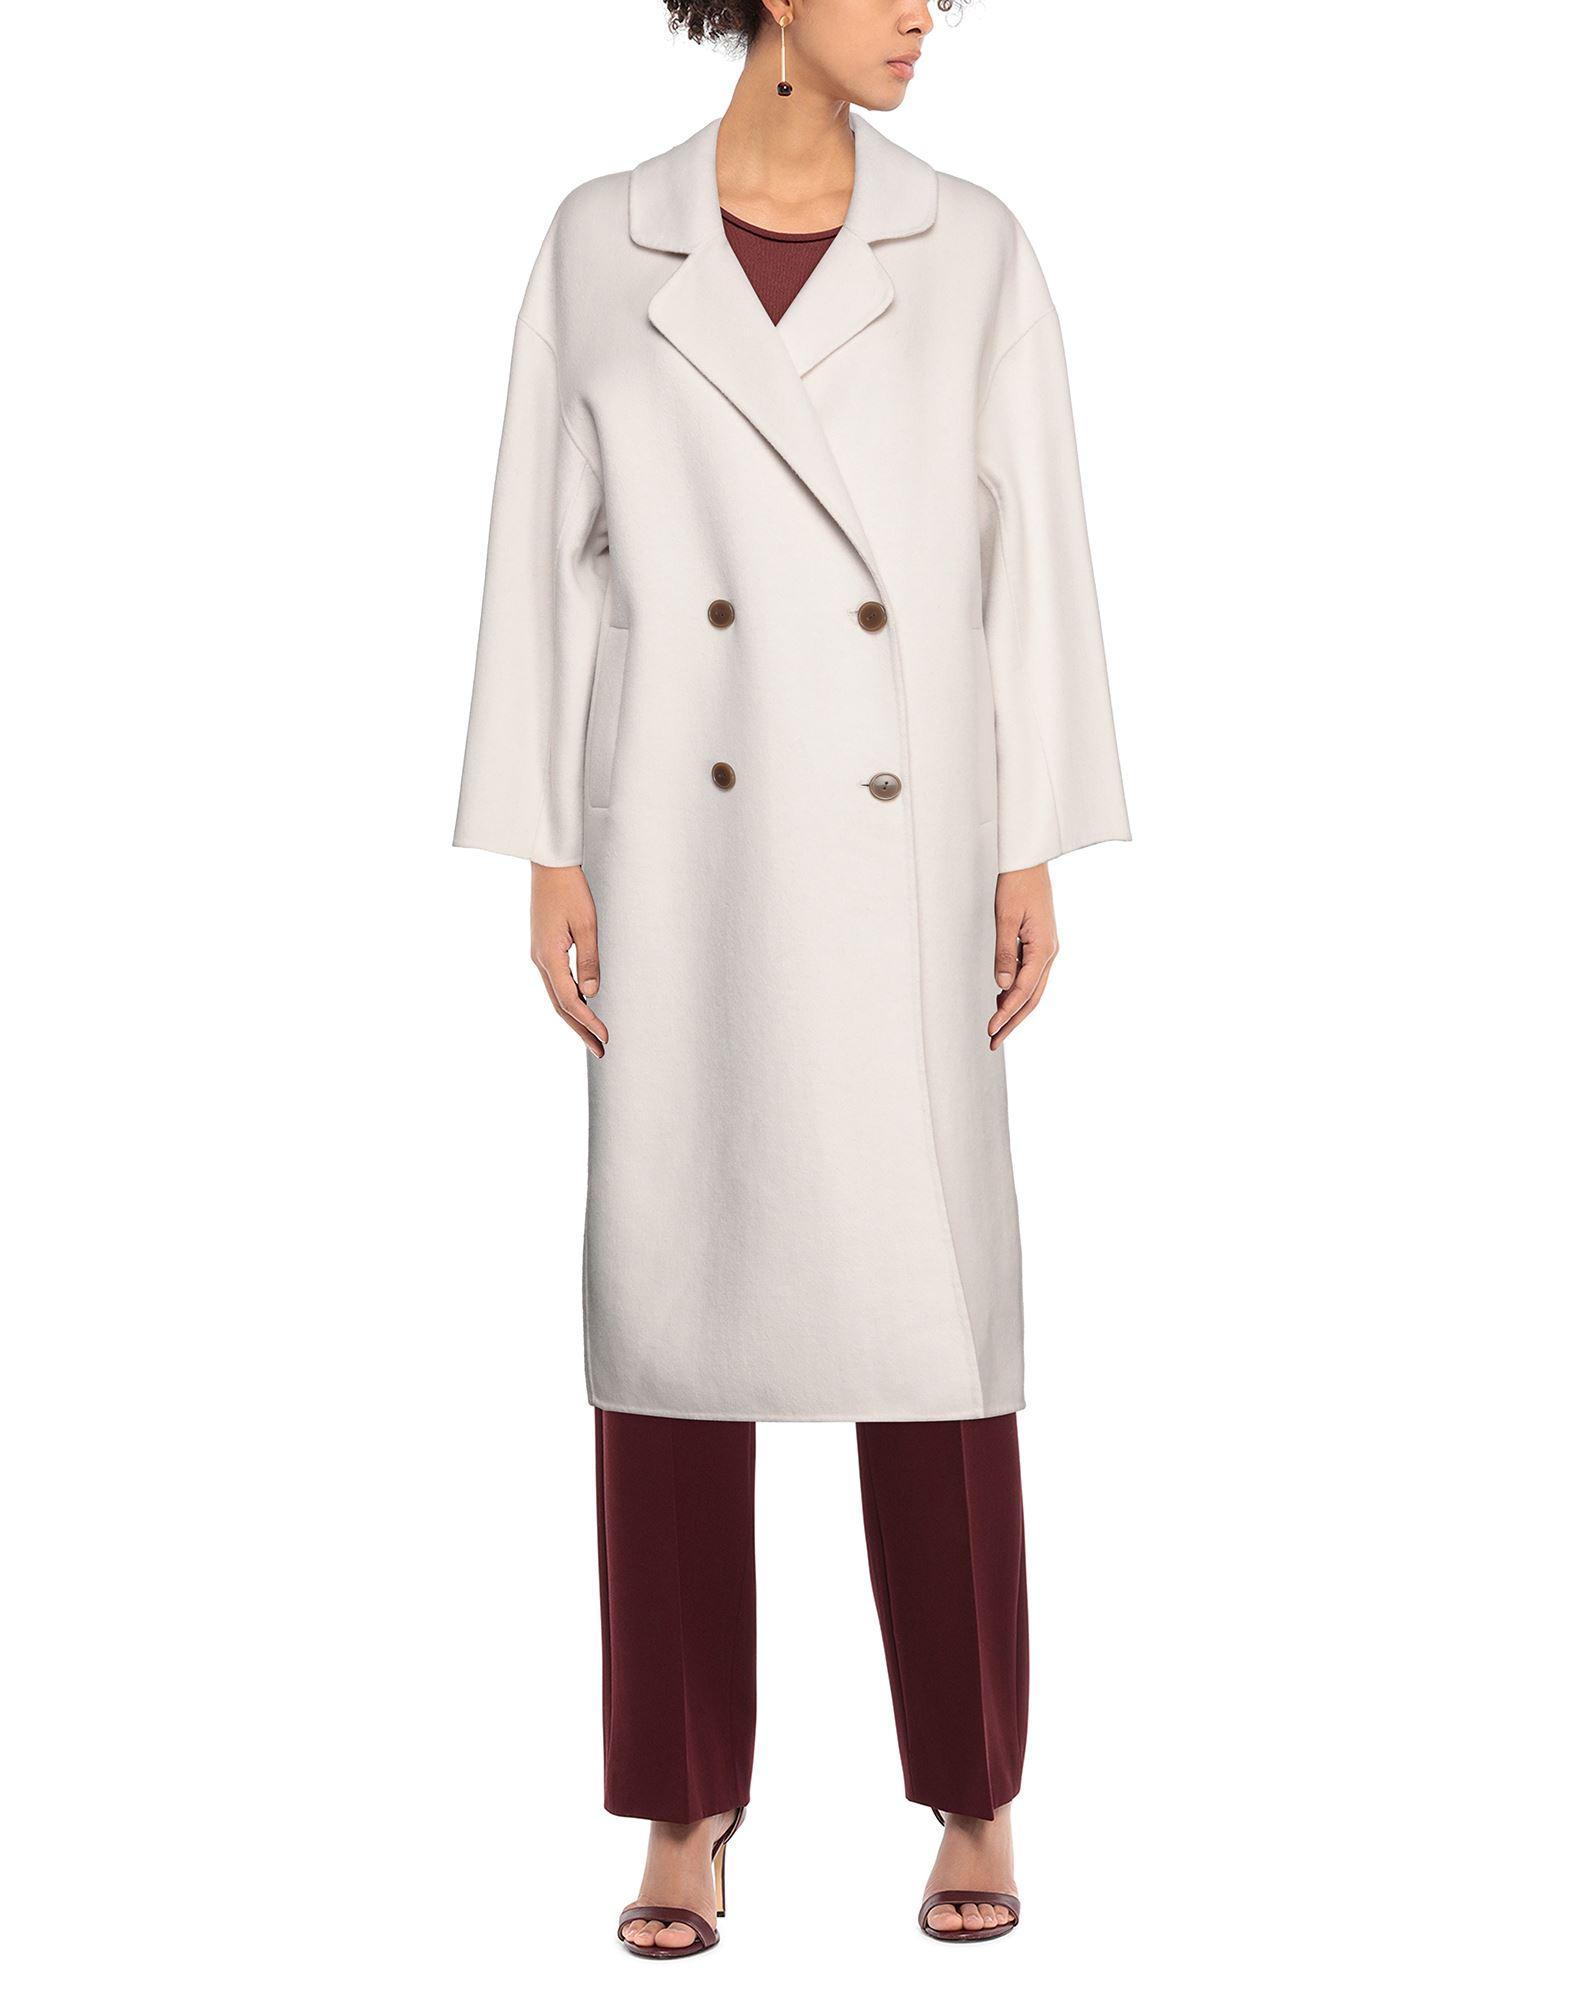 Attic And Barn Coat in White | Lyst